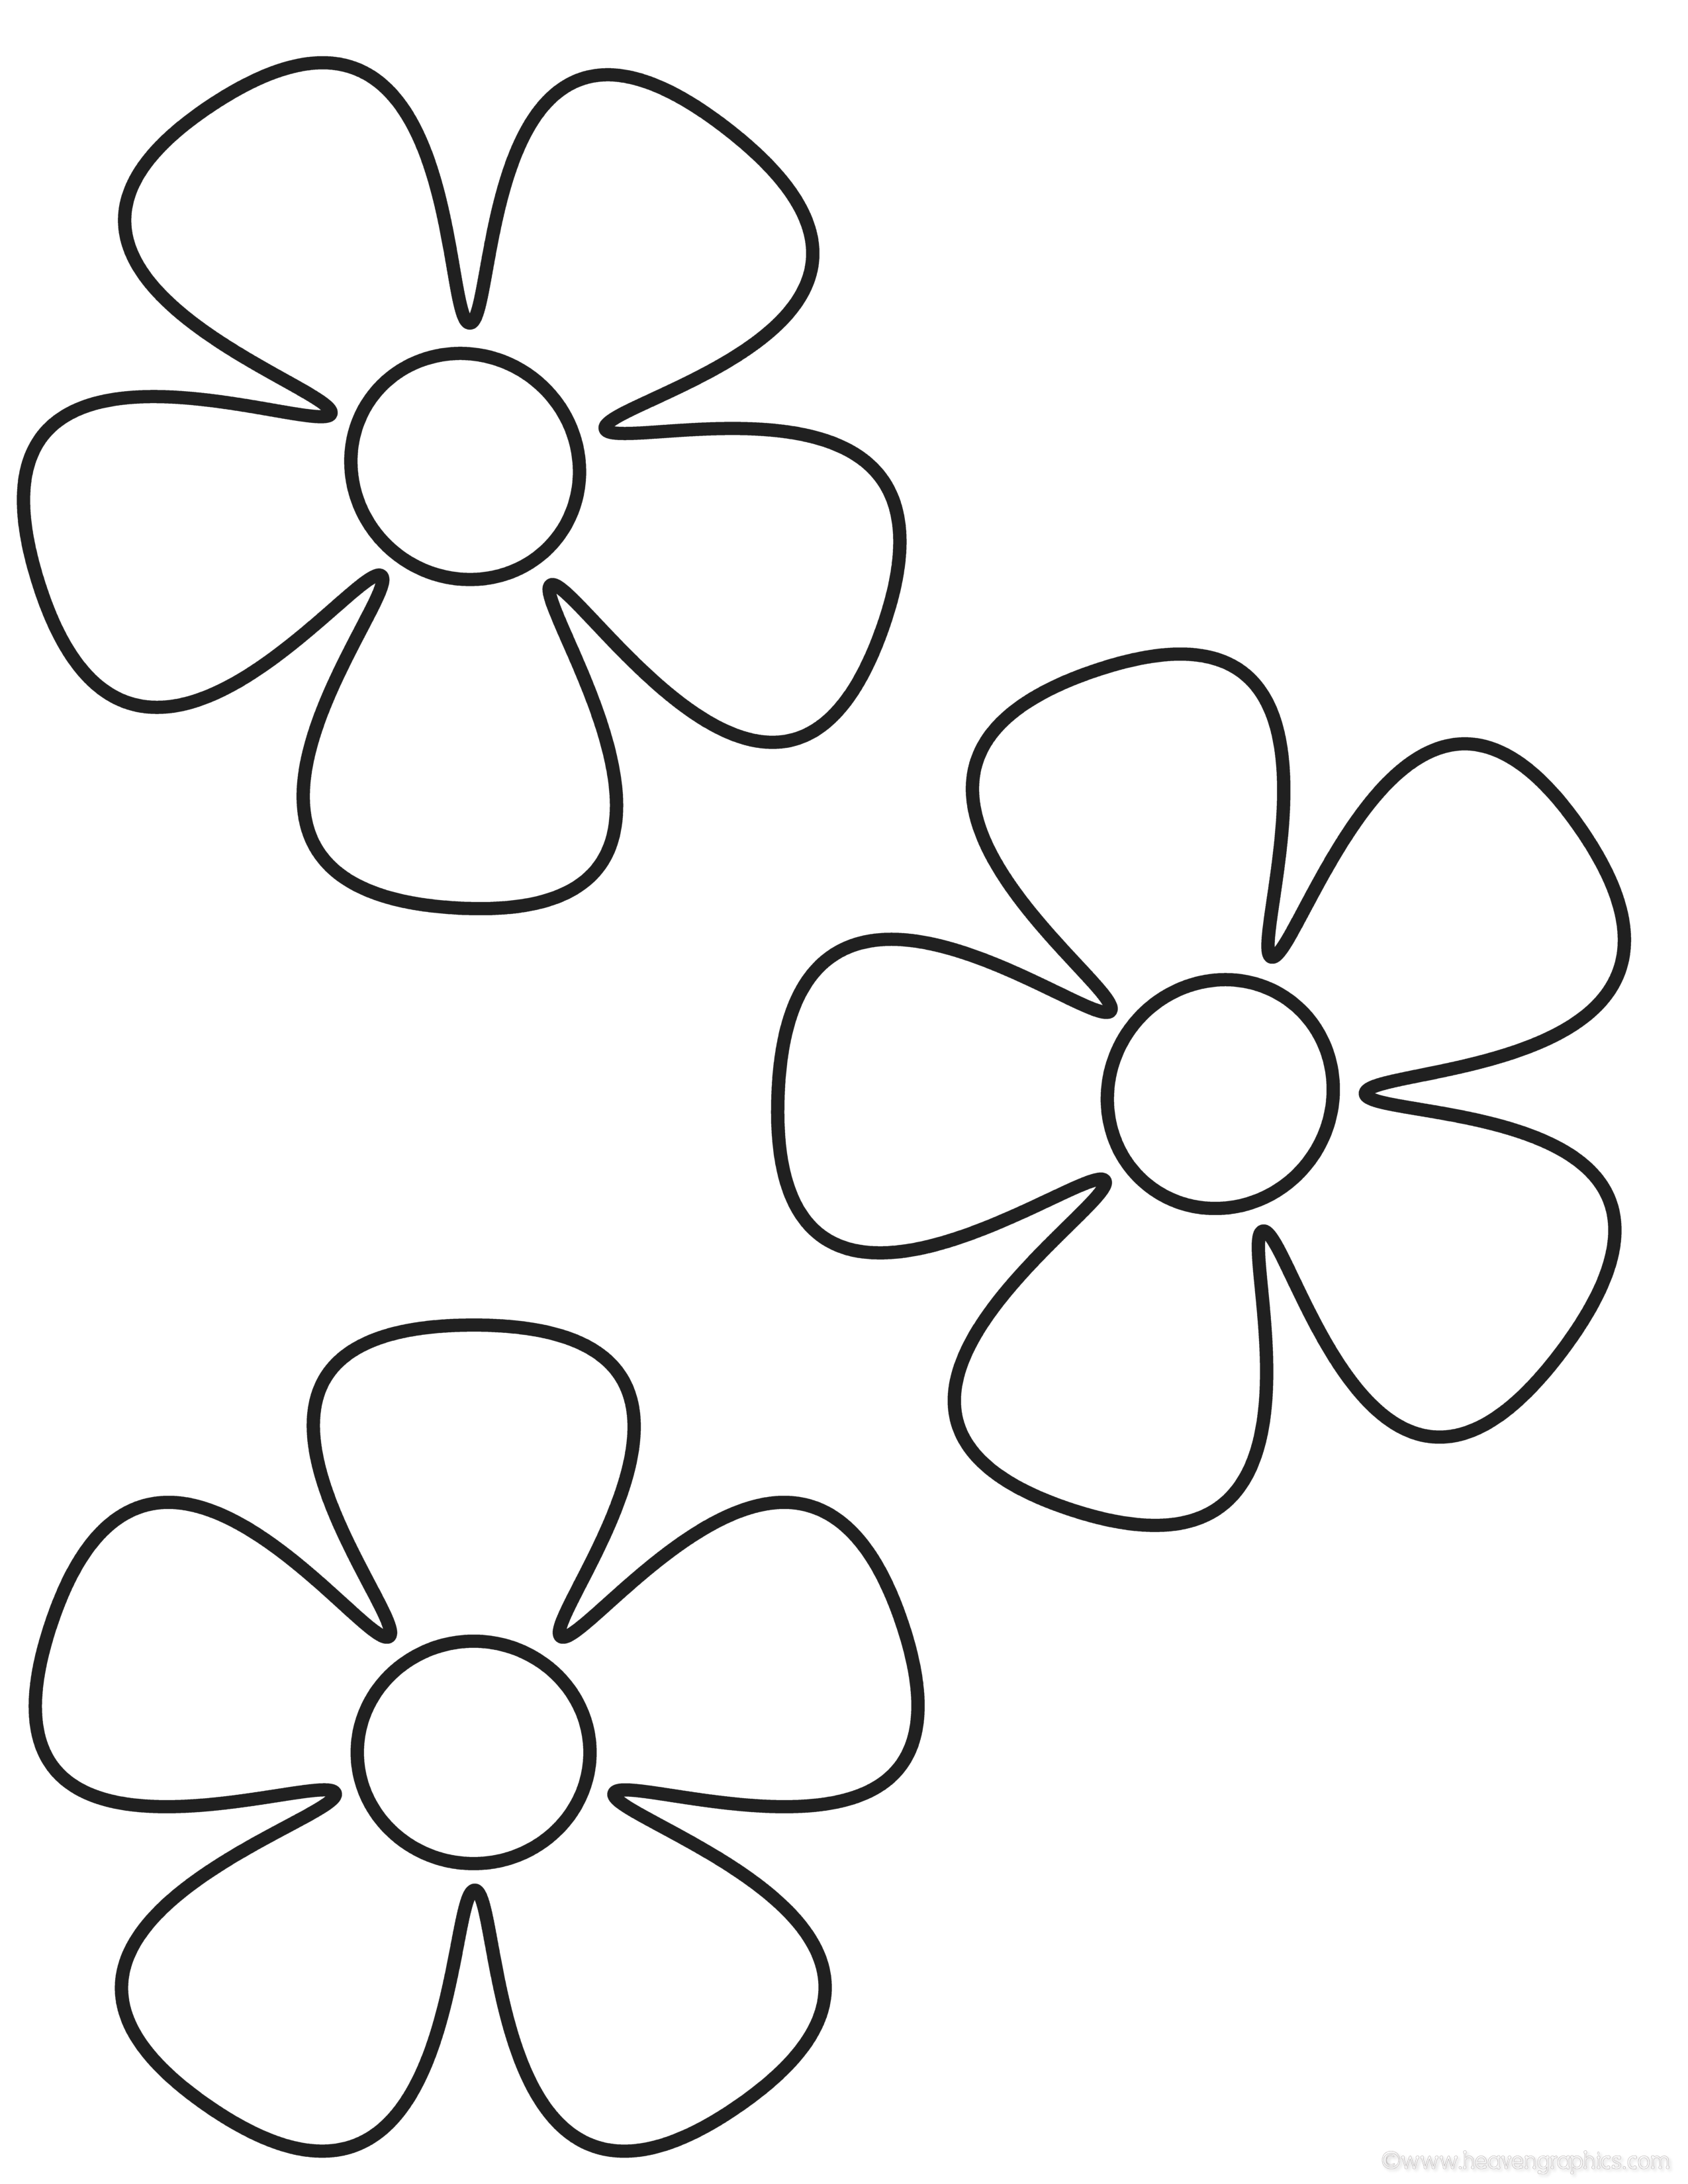 Printable Coloring Pages Flowers – Kids Flower Coloring Pages | Kids Coloring  Page… | Flower coloring sheets, Flower coloring pages, Printable flower  coloring pages